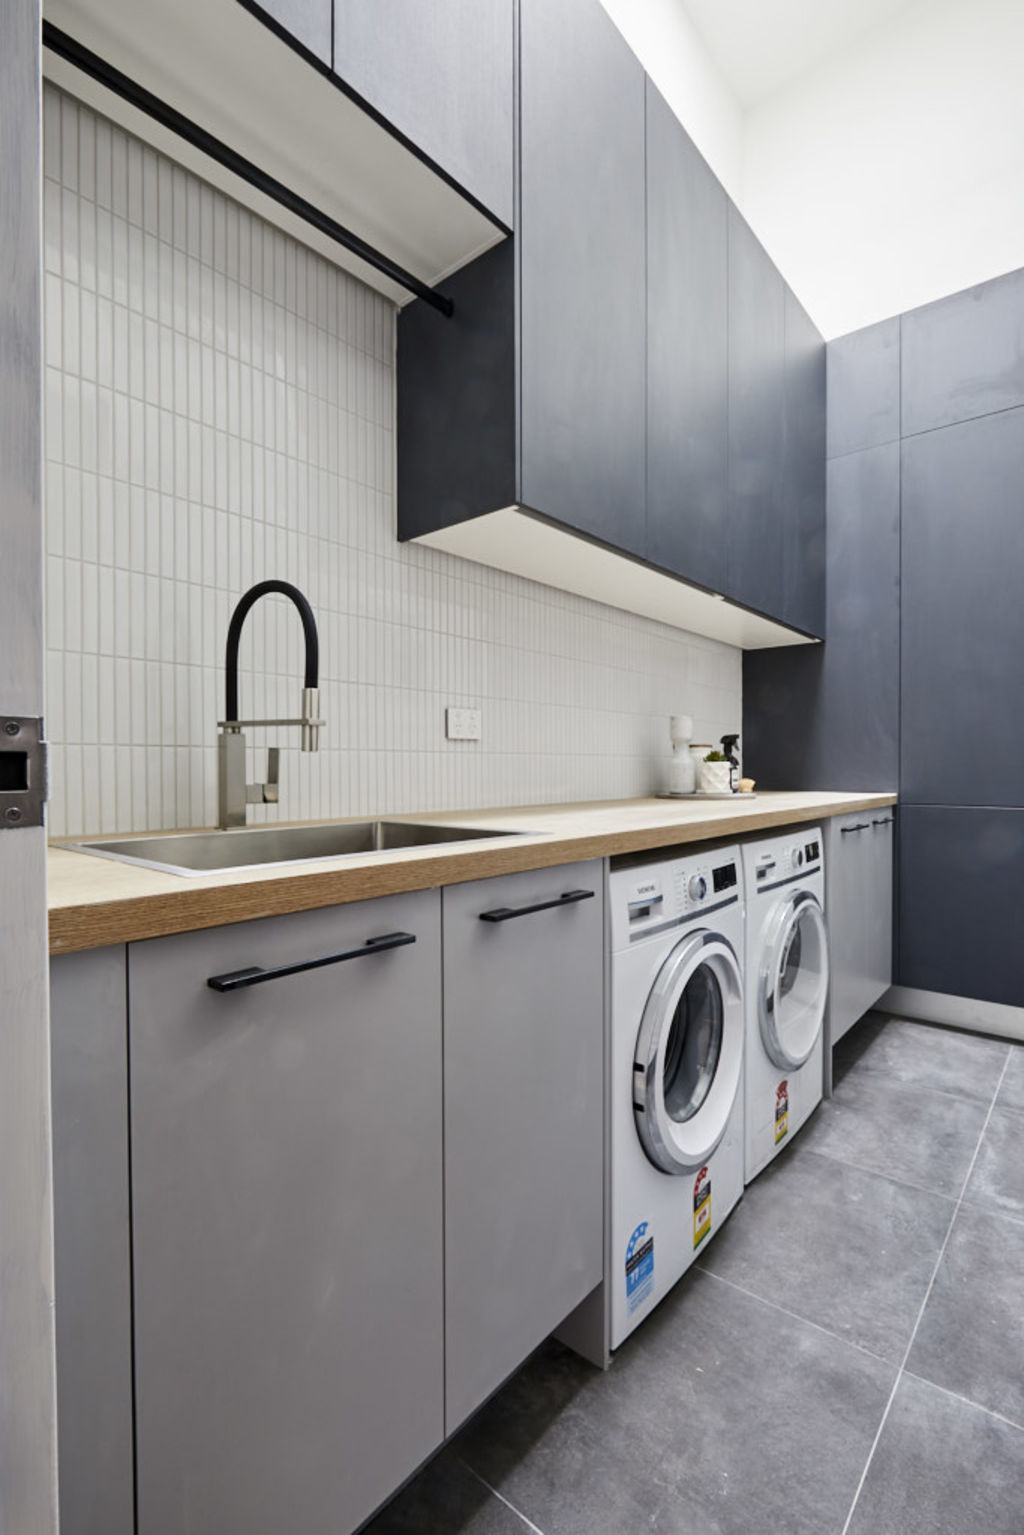 Darren Palmer said the laundry ticks all the boxes in terms of style and functionality. Photo: Channel Nine Photo: Channel Nine